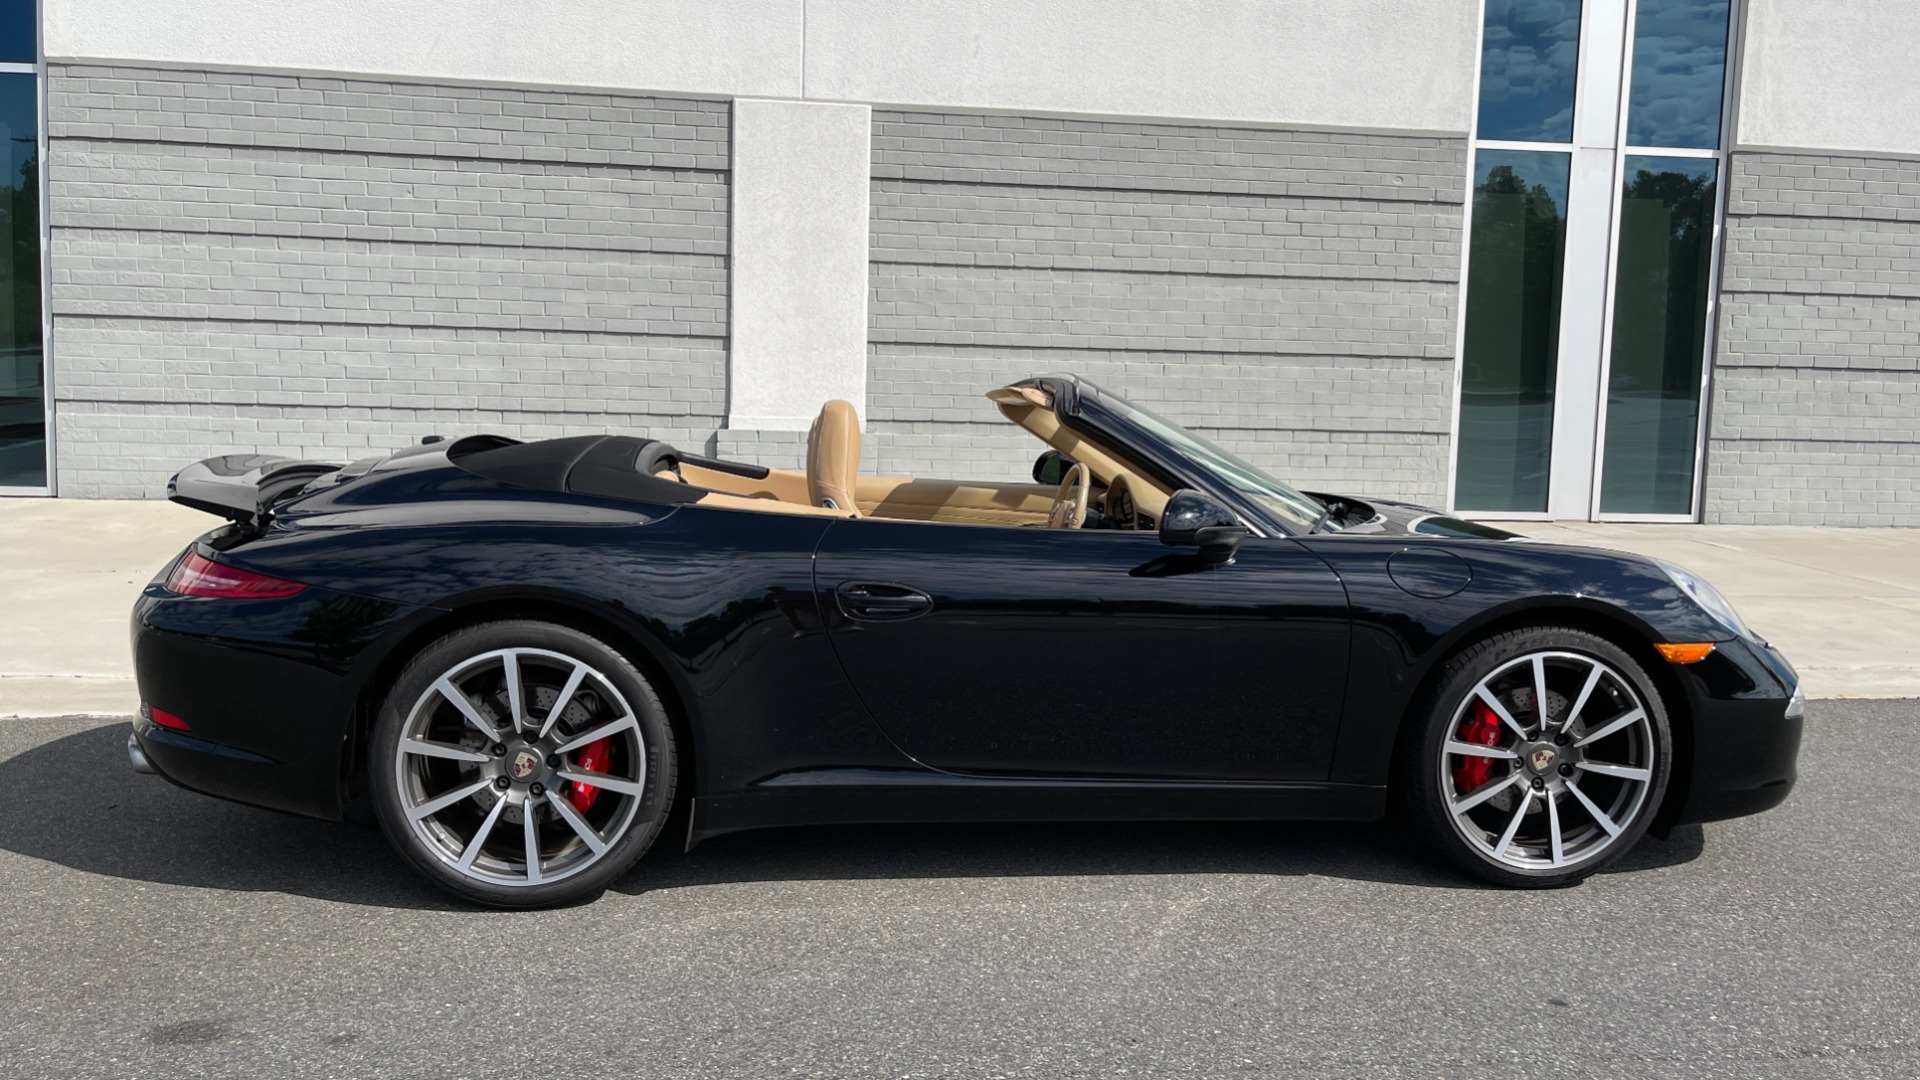 Used 2013 Porsche 911 CARRERA CABRIOLET / PDK / NAV / BOSE / HTD STS / PDLS for sale Sold at Formula Imports in Charlotte NC 28227 3